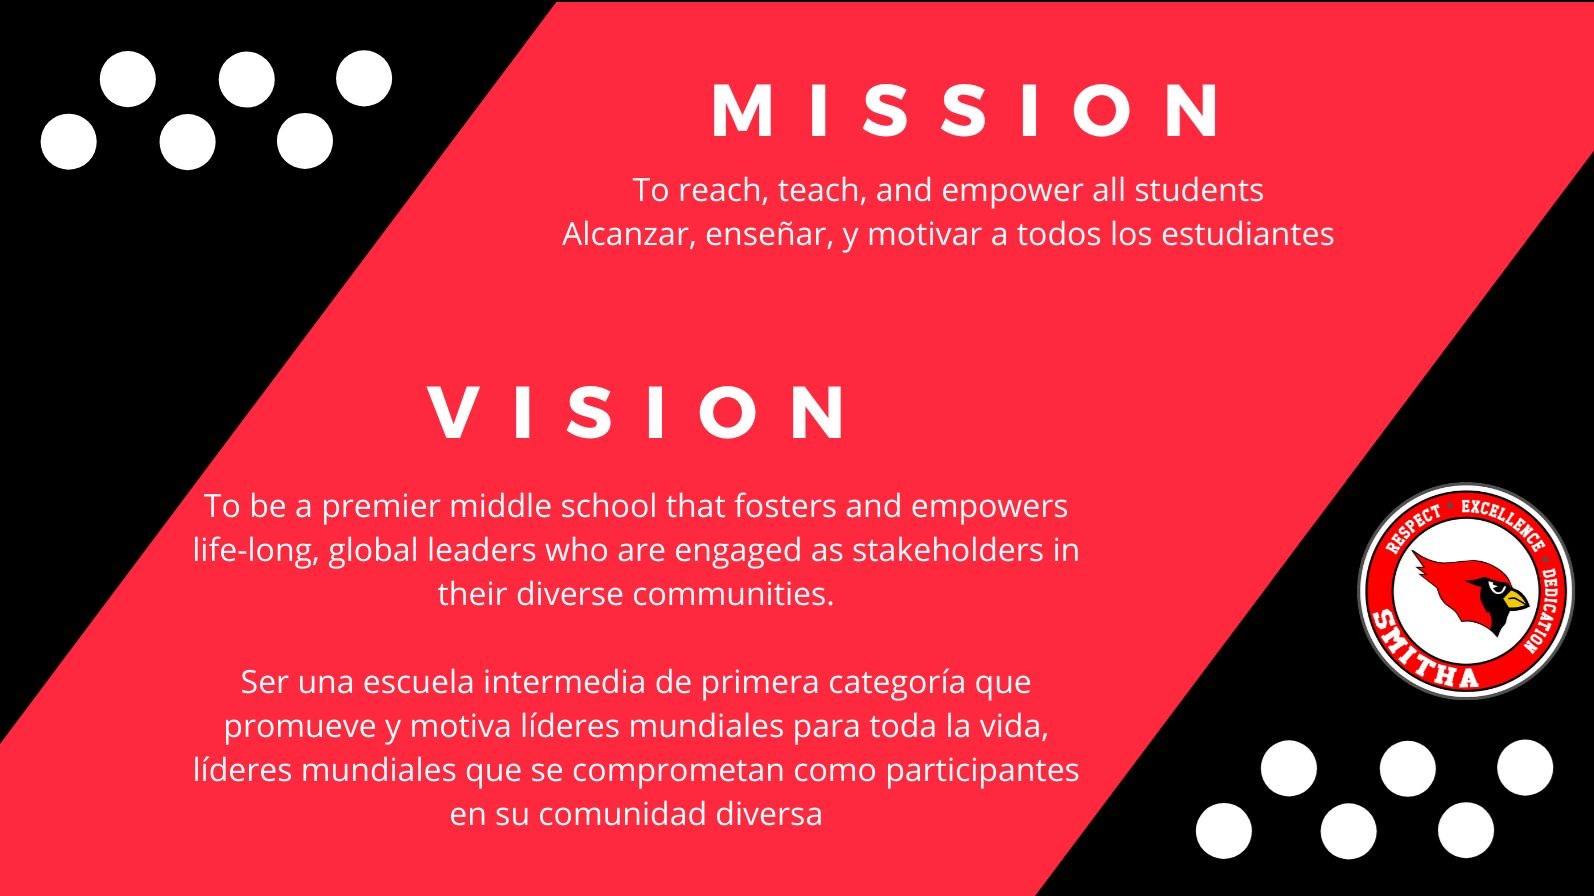 Red and black stripped slide with white dots. Mission: To reach, teach and empower all students. Vision: to be a premier middle school that fosters and empowers life-long, global leaders who are engaged as stakeholders in their diverse communities.